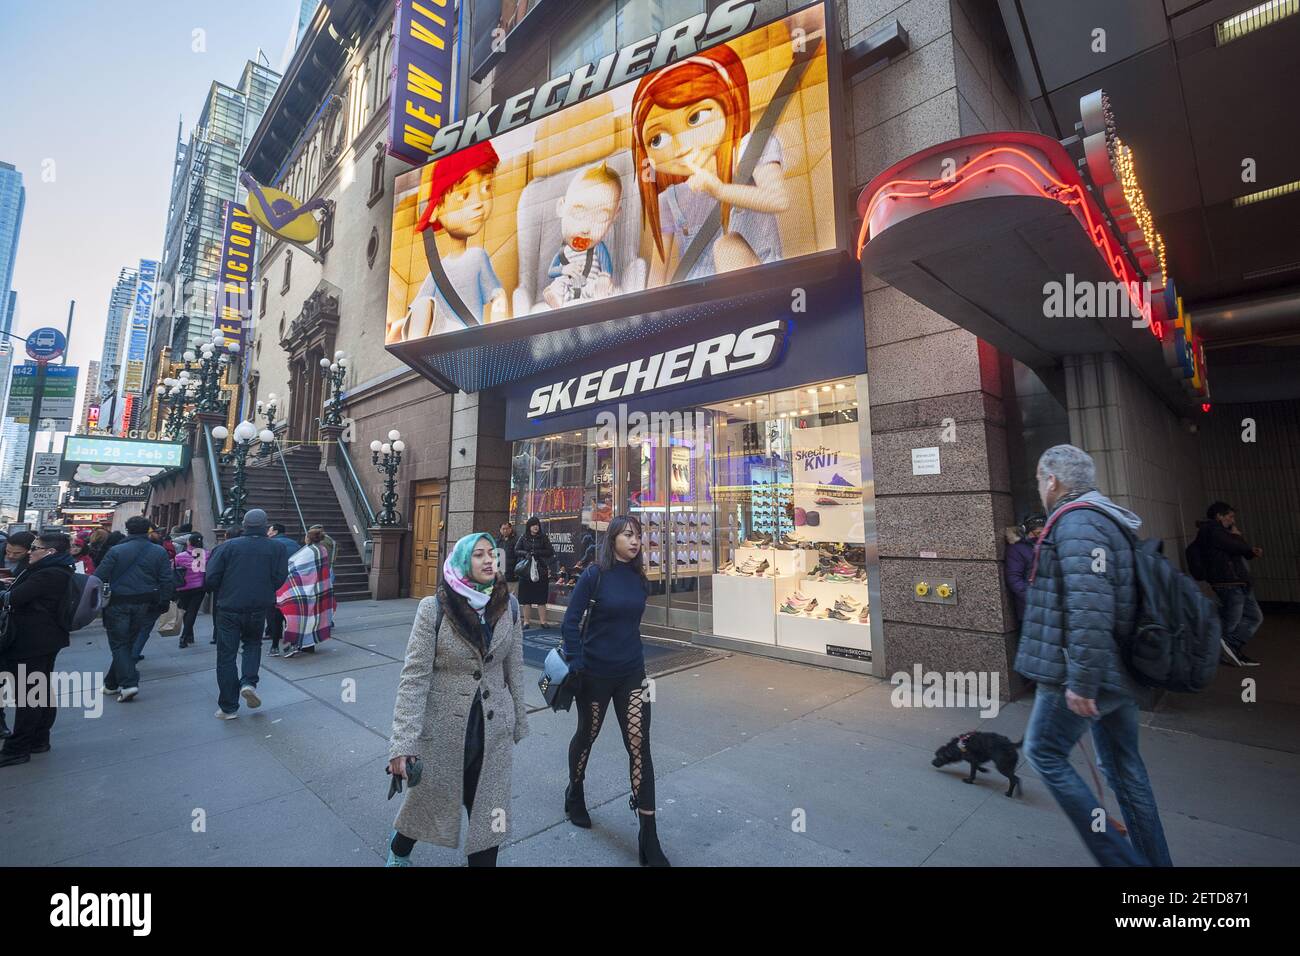 A Skechers store in Times Square in New York on Wednesday, January 25,  2017. The Conference Board announced that consumer confidence fell in  January after achieving a 15 year high on December. (